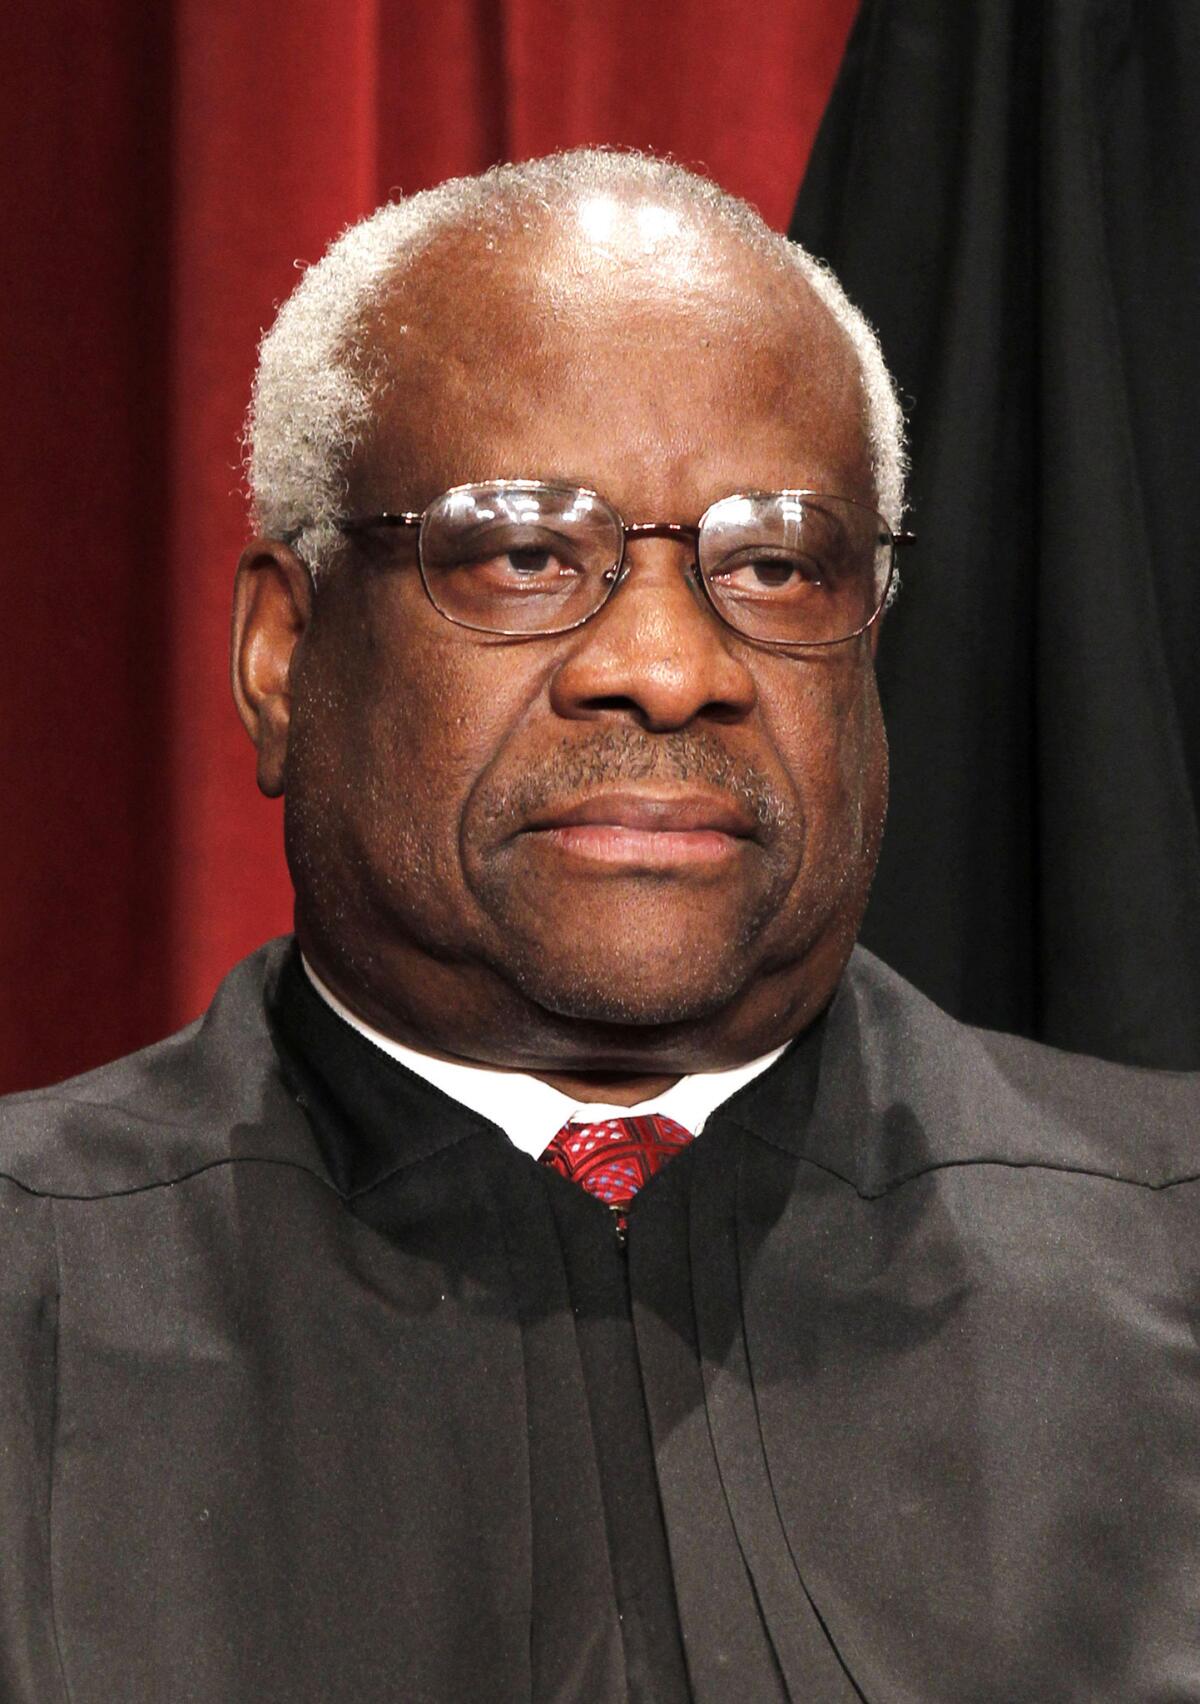 Justice Clarence Thomas in 2010. He is the subject of Jeffrey Toobin's New Yorker column: "Clarence Thomas' Disgraceful Silence."